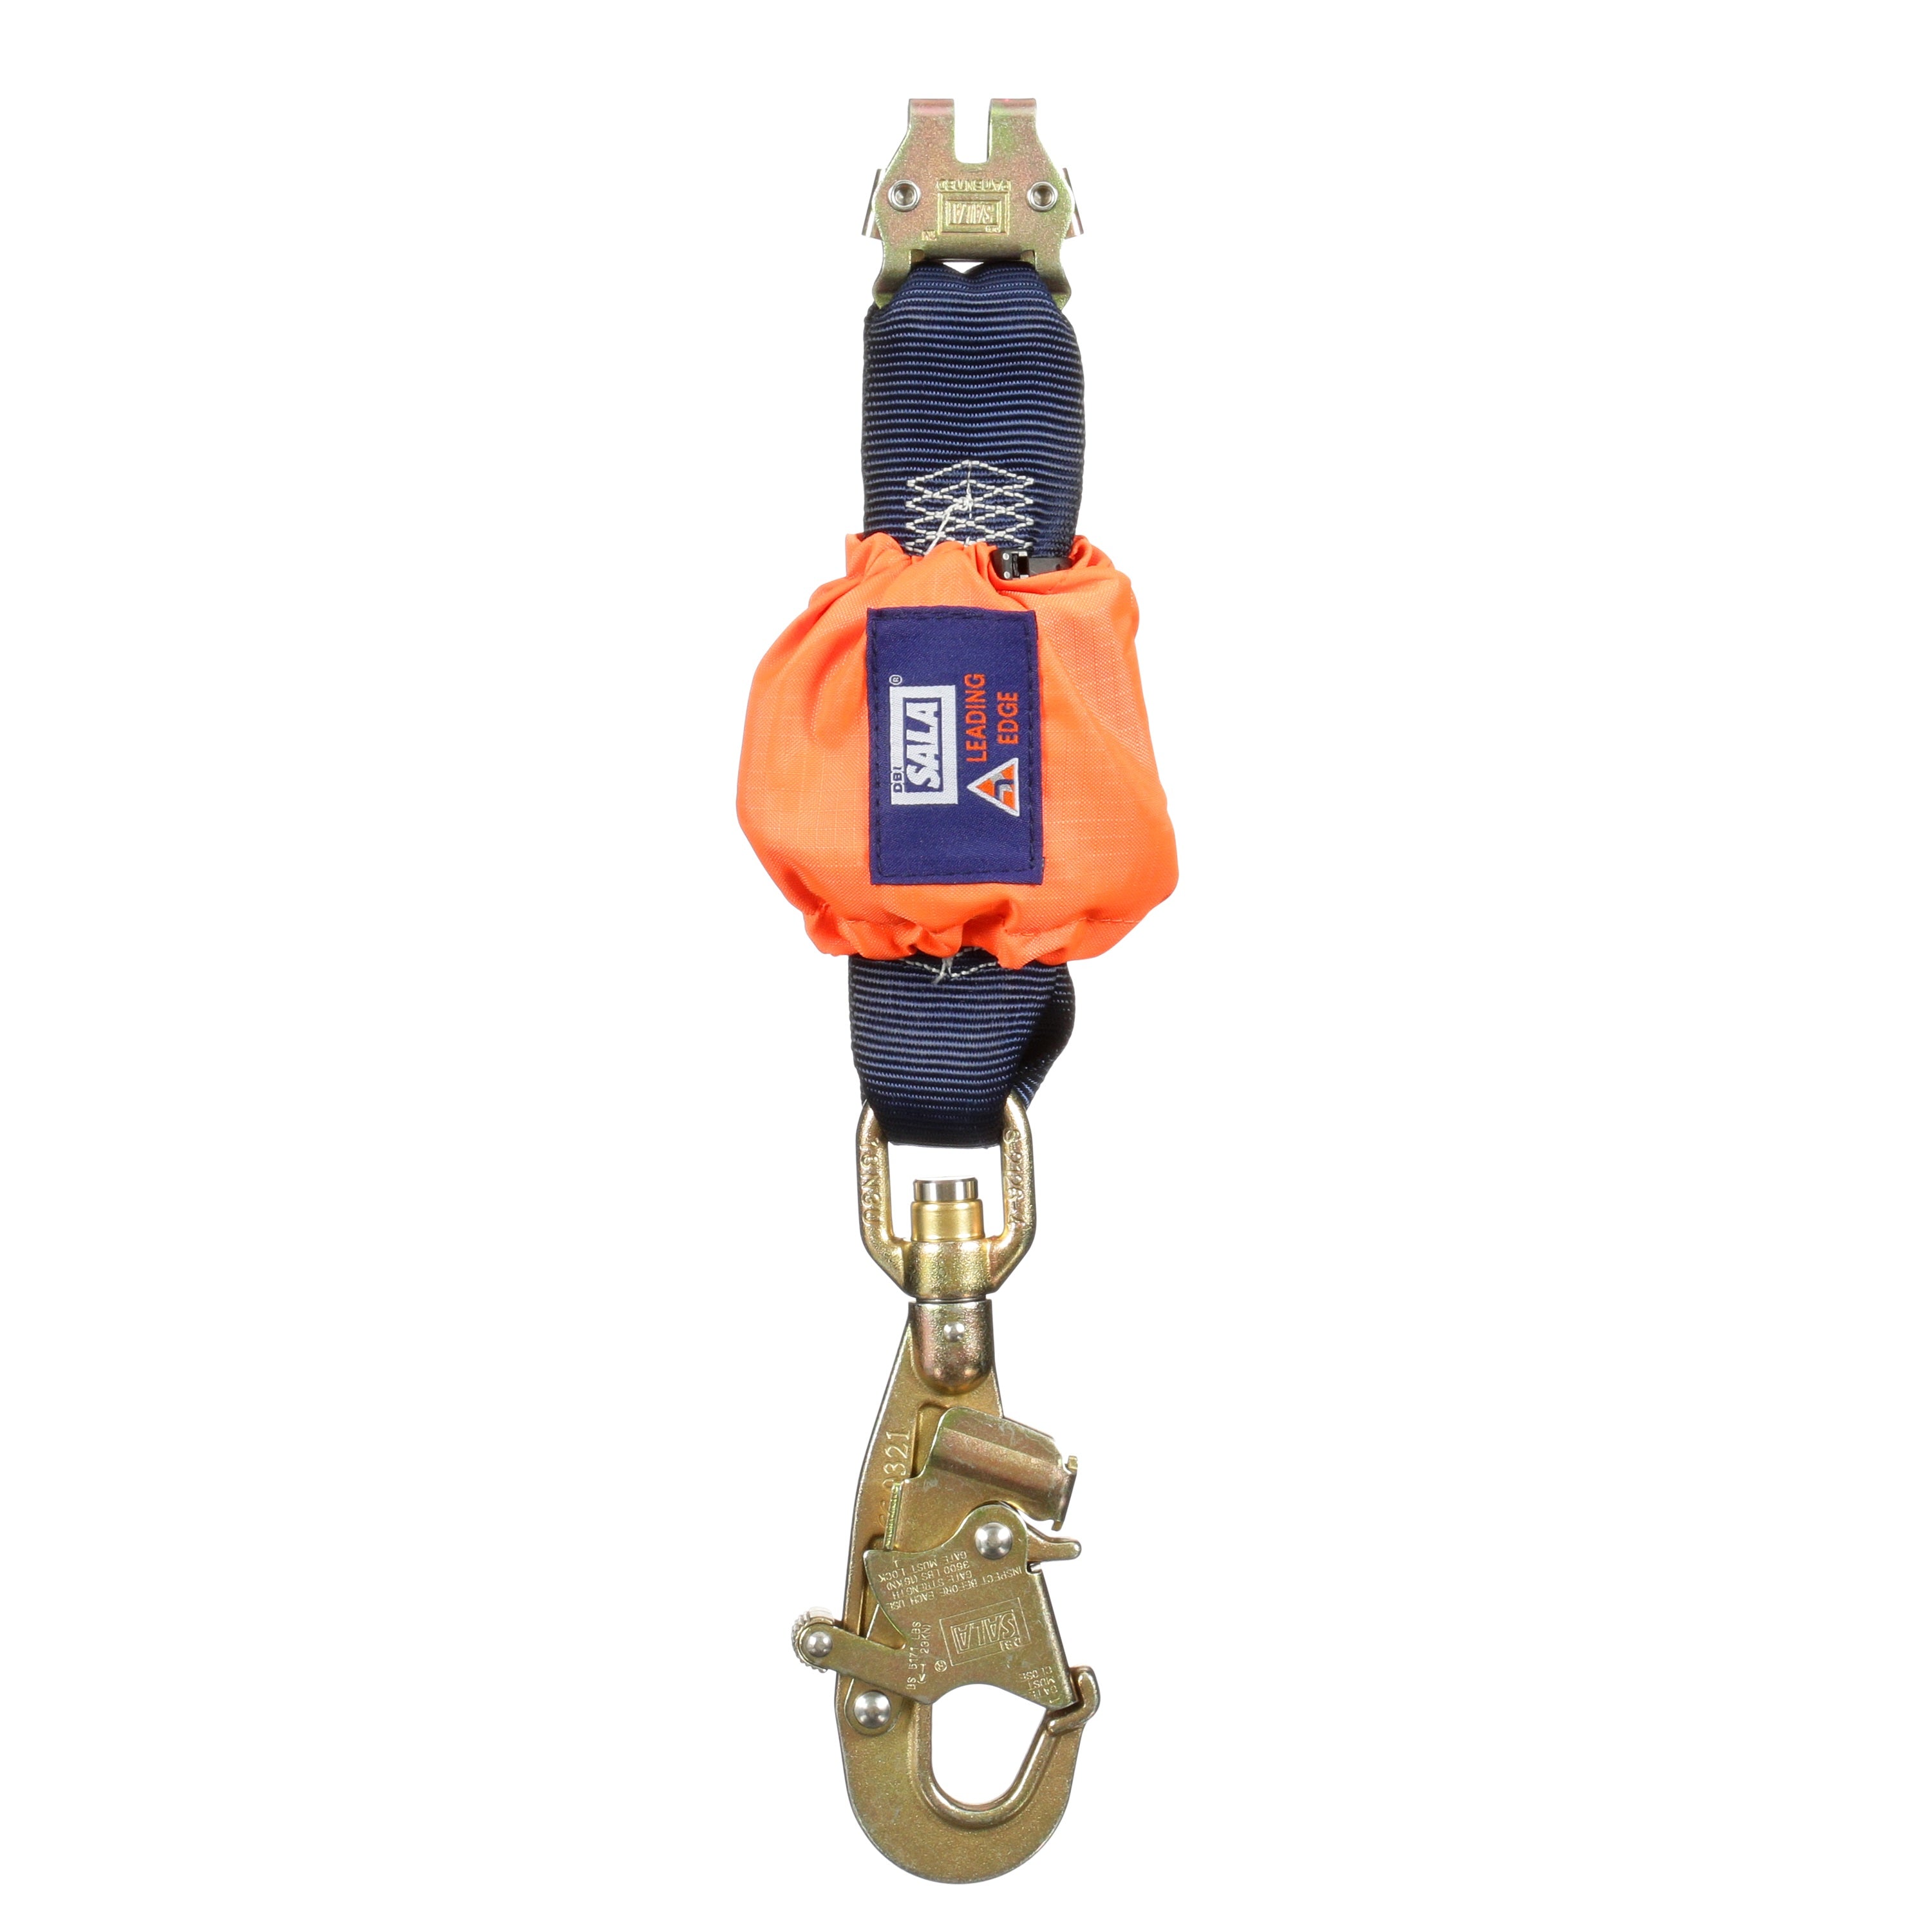 14" Modular LE D-Ring Extension 1246500, Approved for use on select Modular Smart Lock Self Retracting Lifeline models